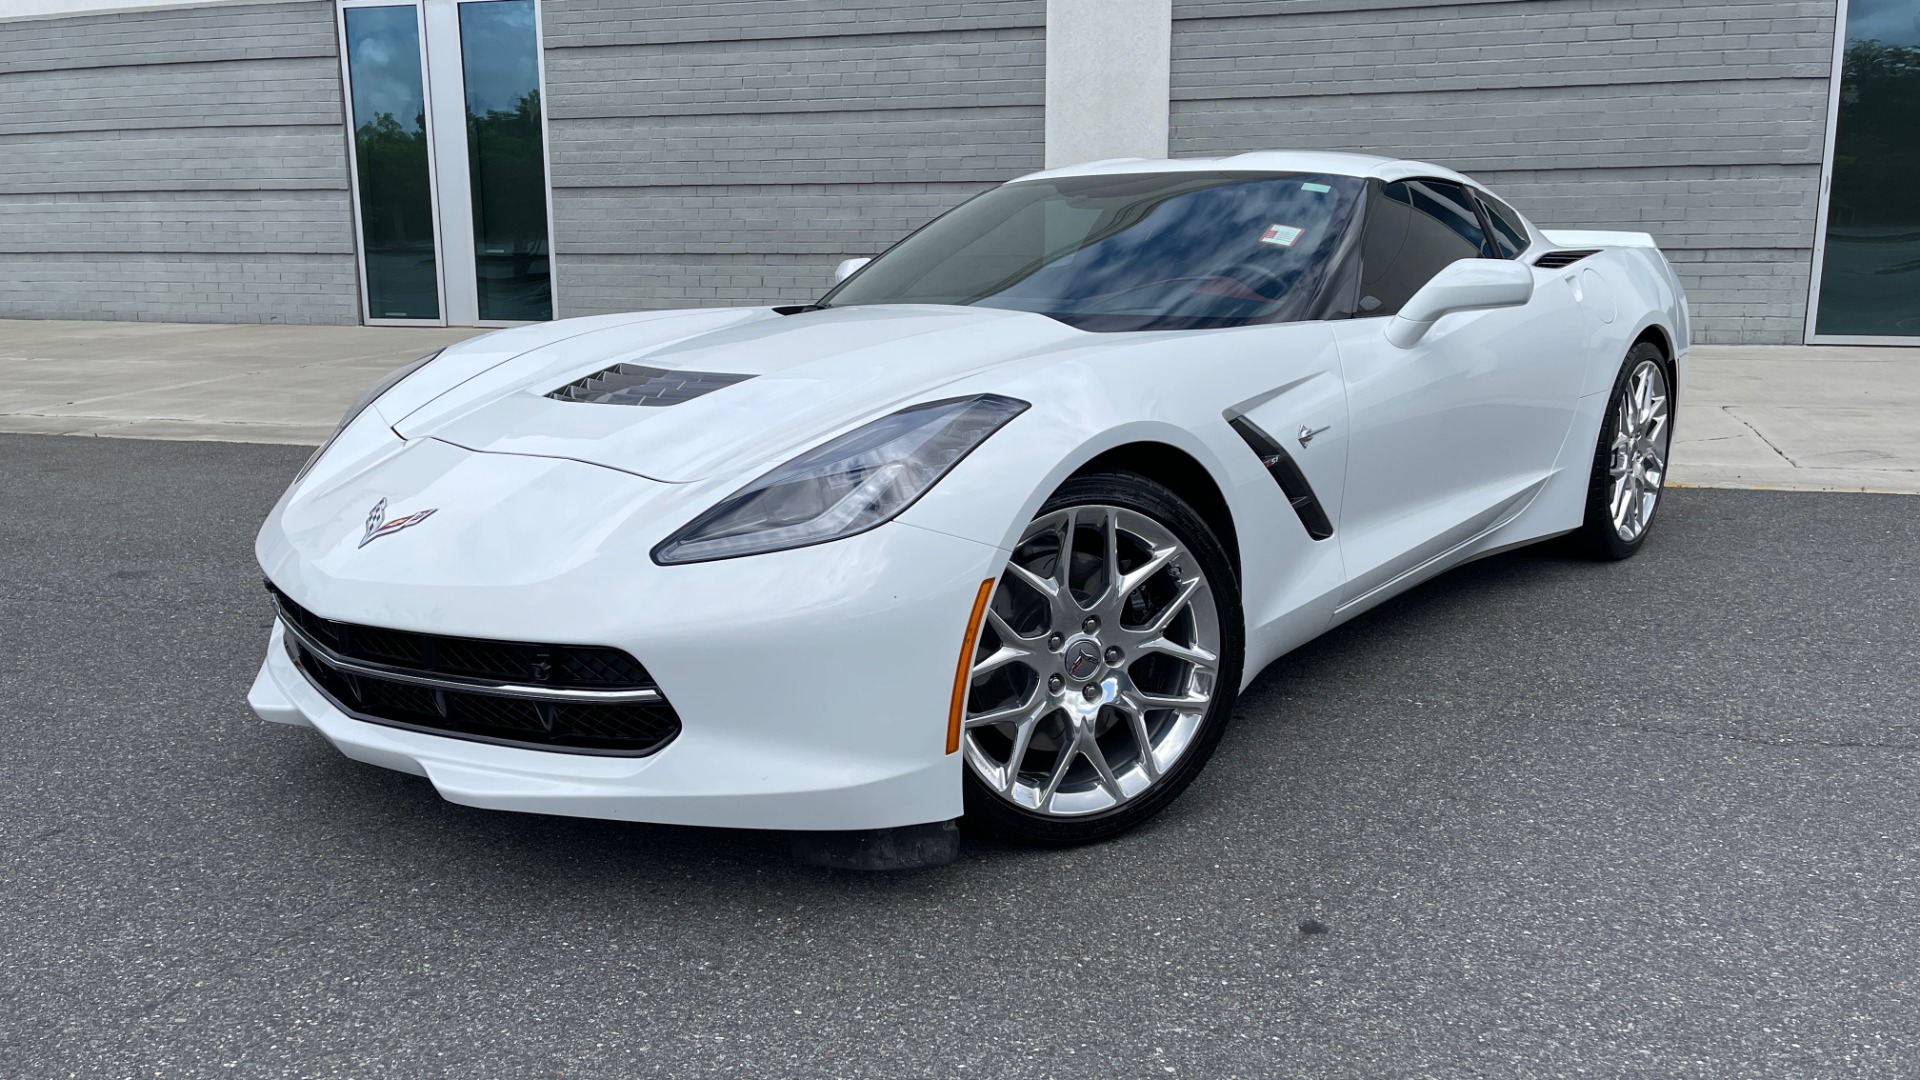 Used 2016 Chevrolet CORVETTE C7 STINGRAY COUPE Z51 3LT / NAV / PERF TRACTION MGMT / REARVIEW for sale Sold at Formula Imports in Charlotte NC 28227 1